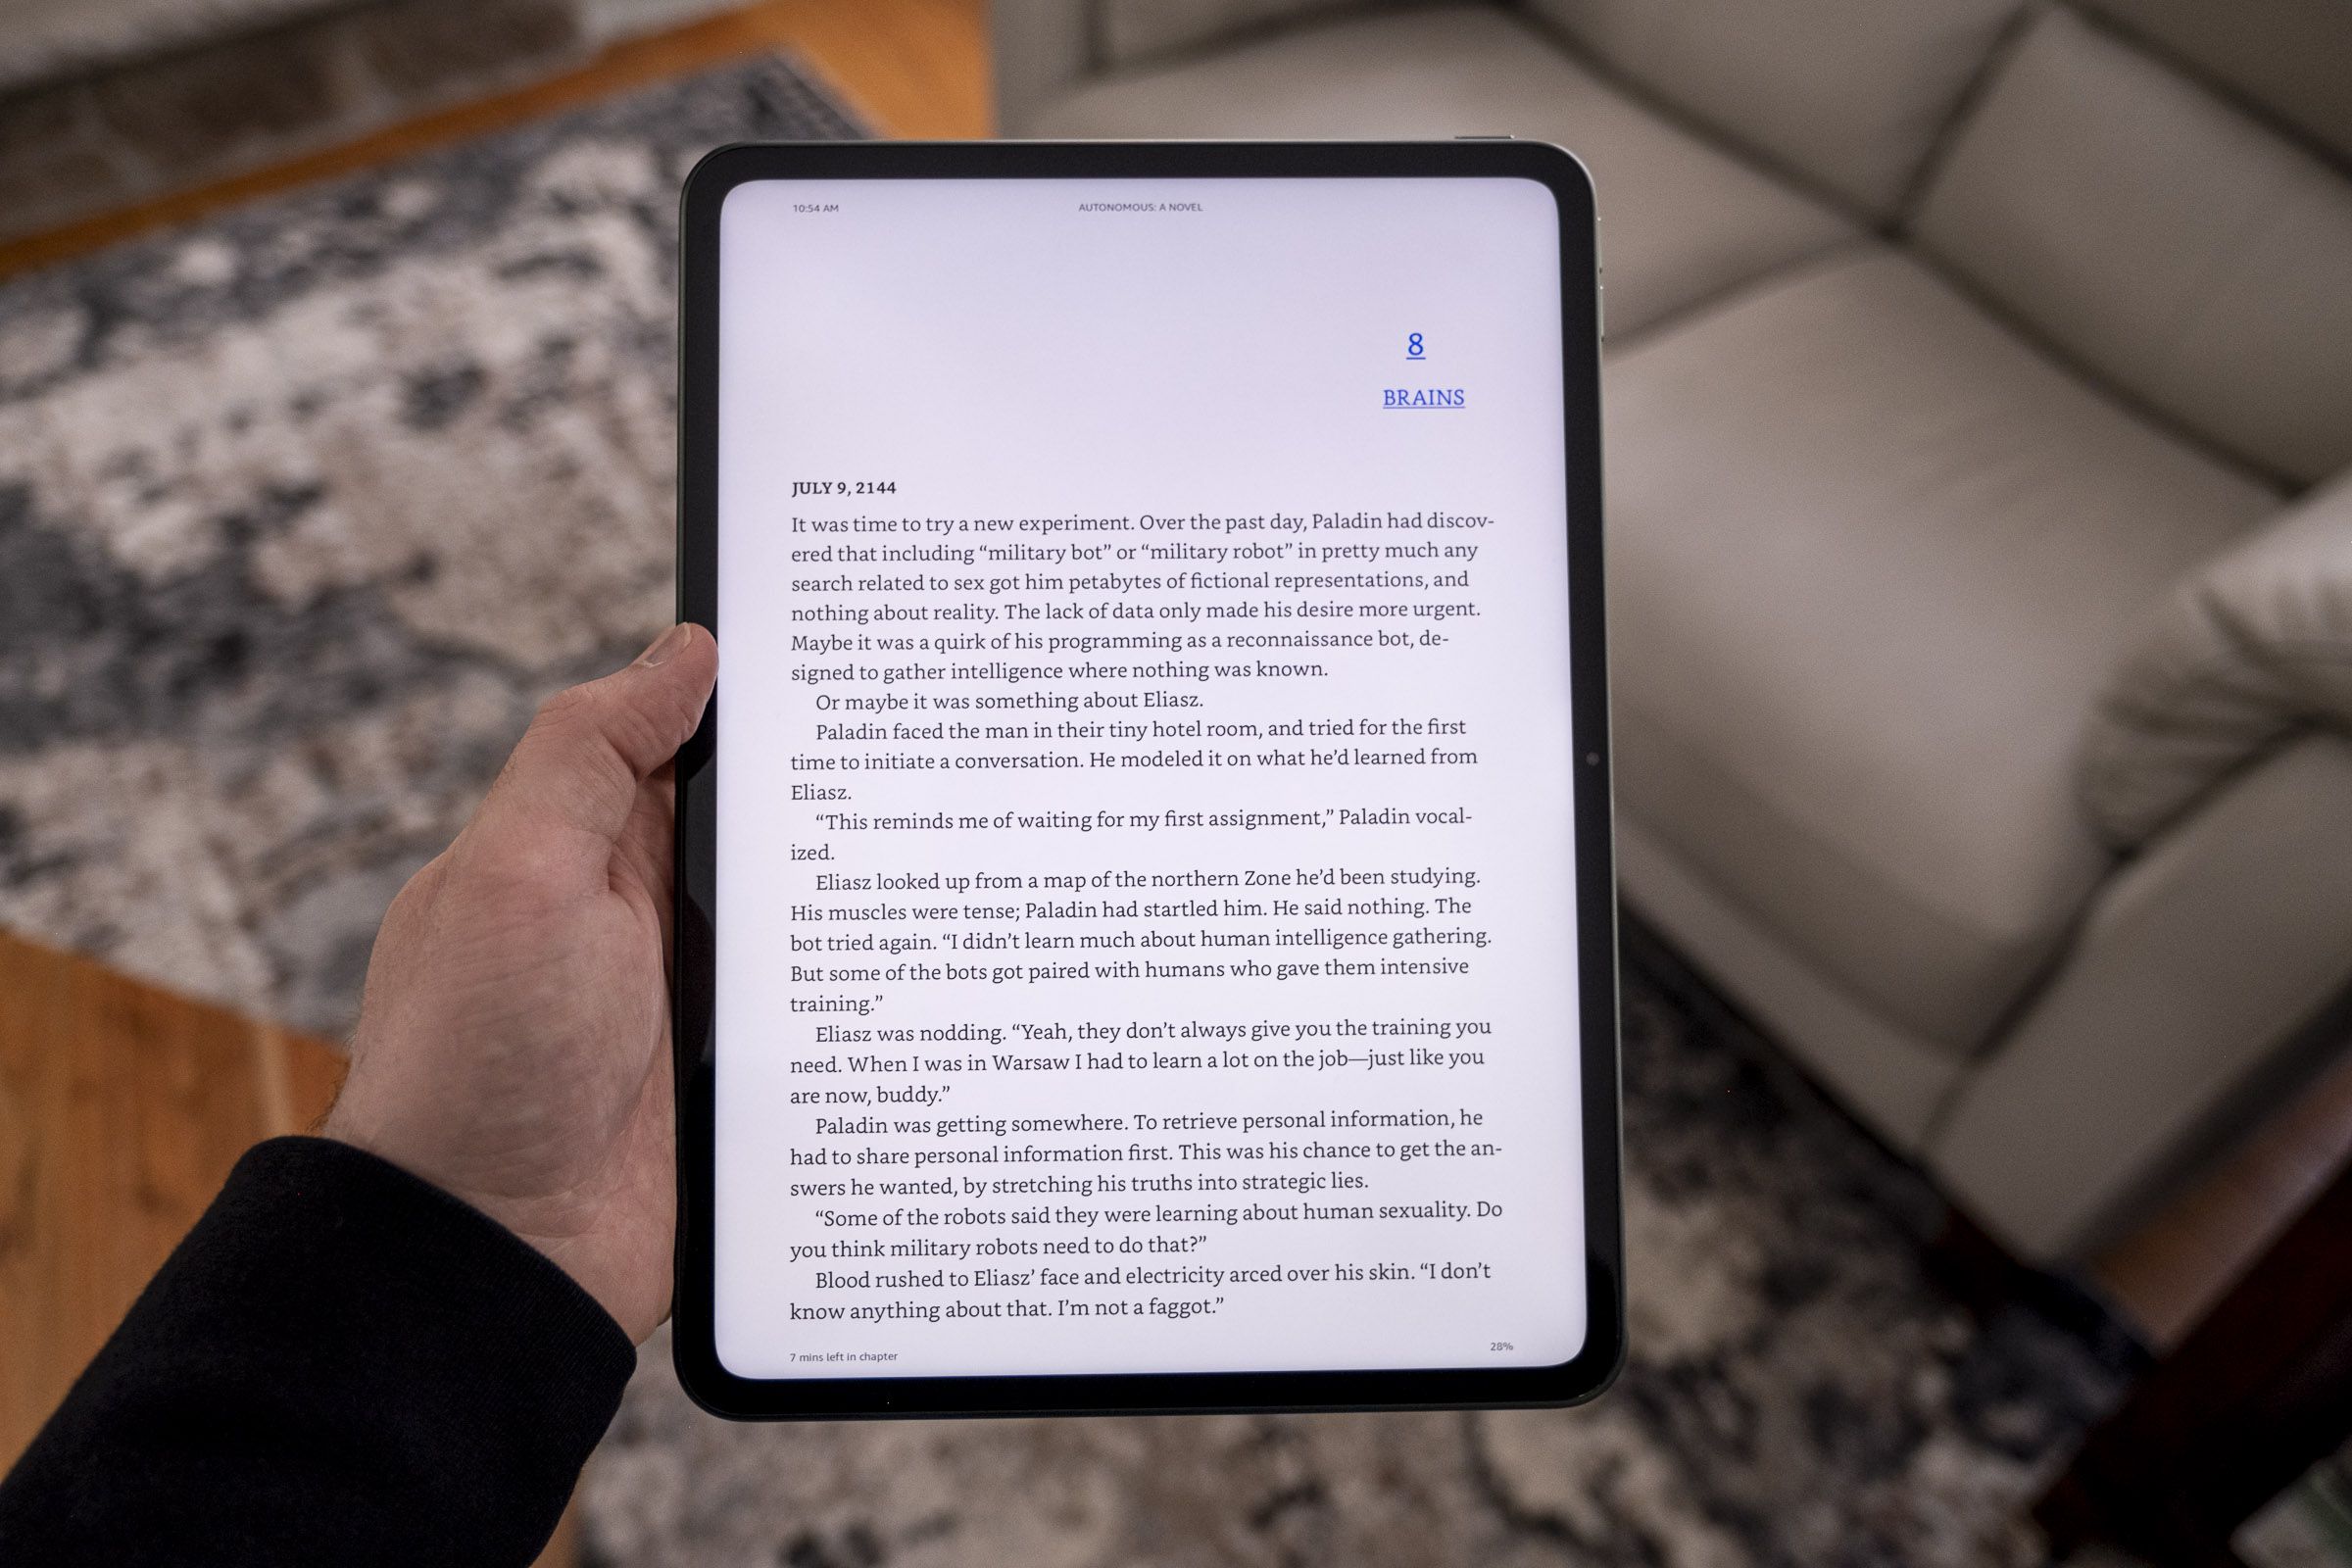 A OnePlus Pad held in portrait orientation displaying a book in the Kindle app